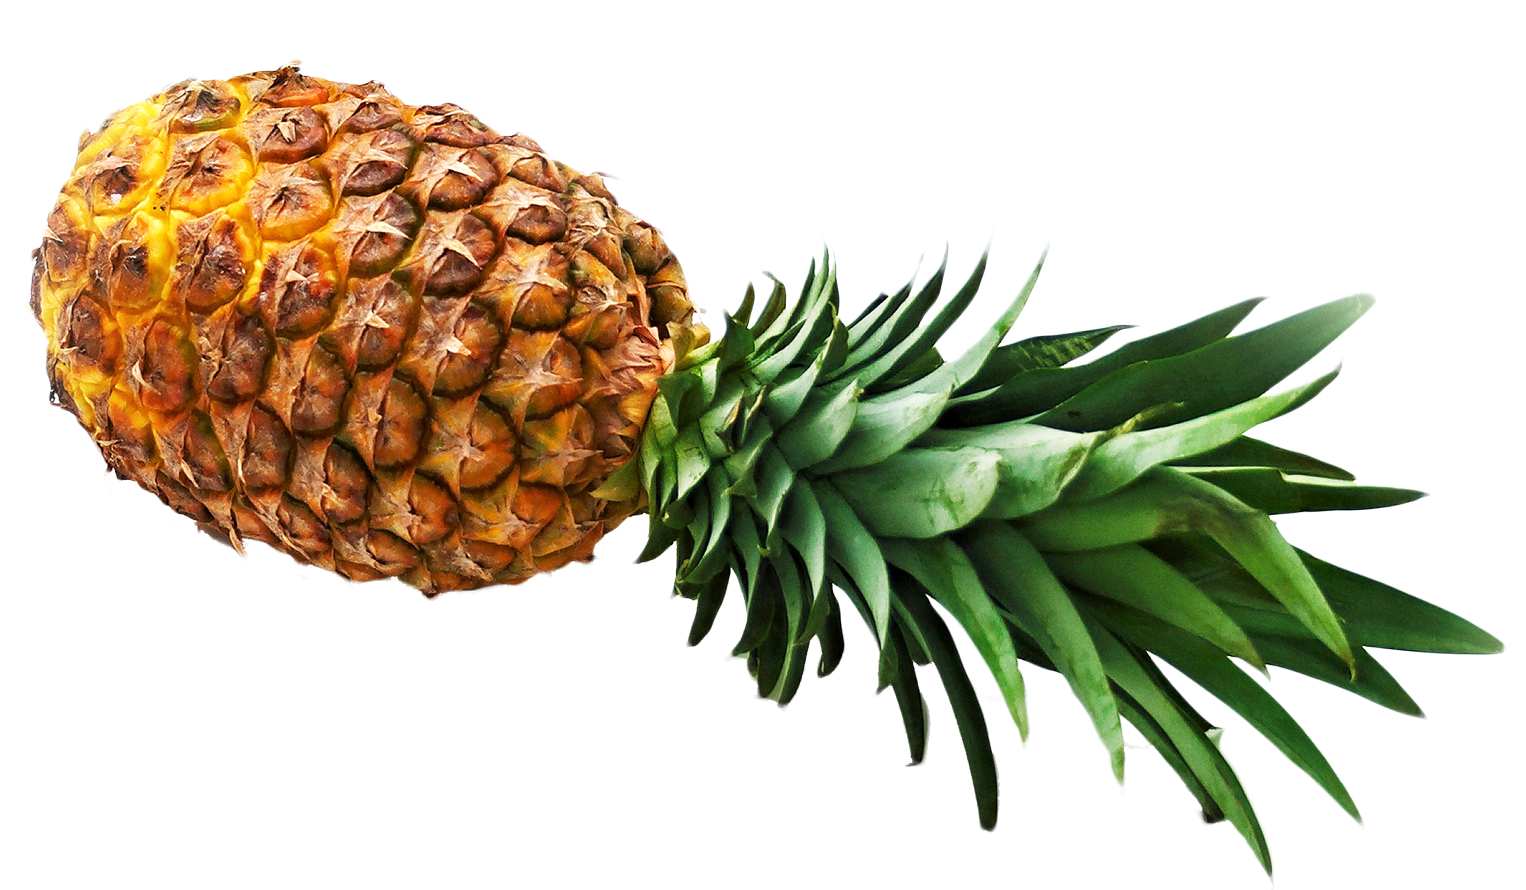 Pineapple PNG Image